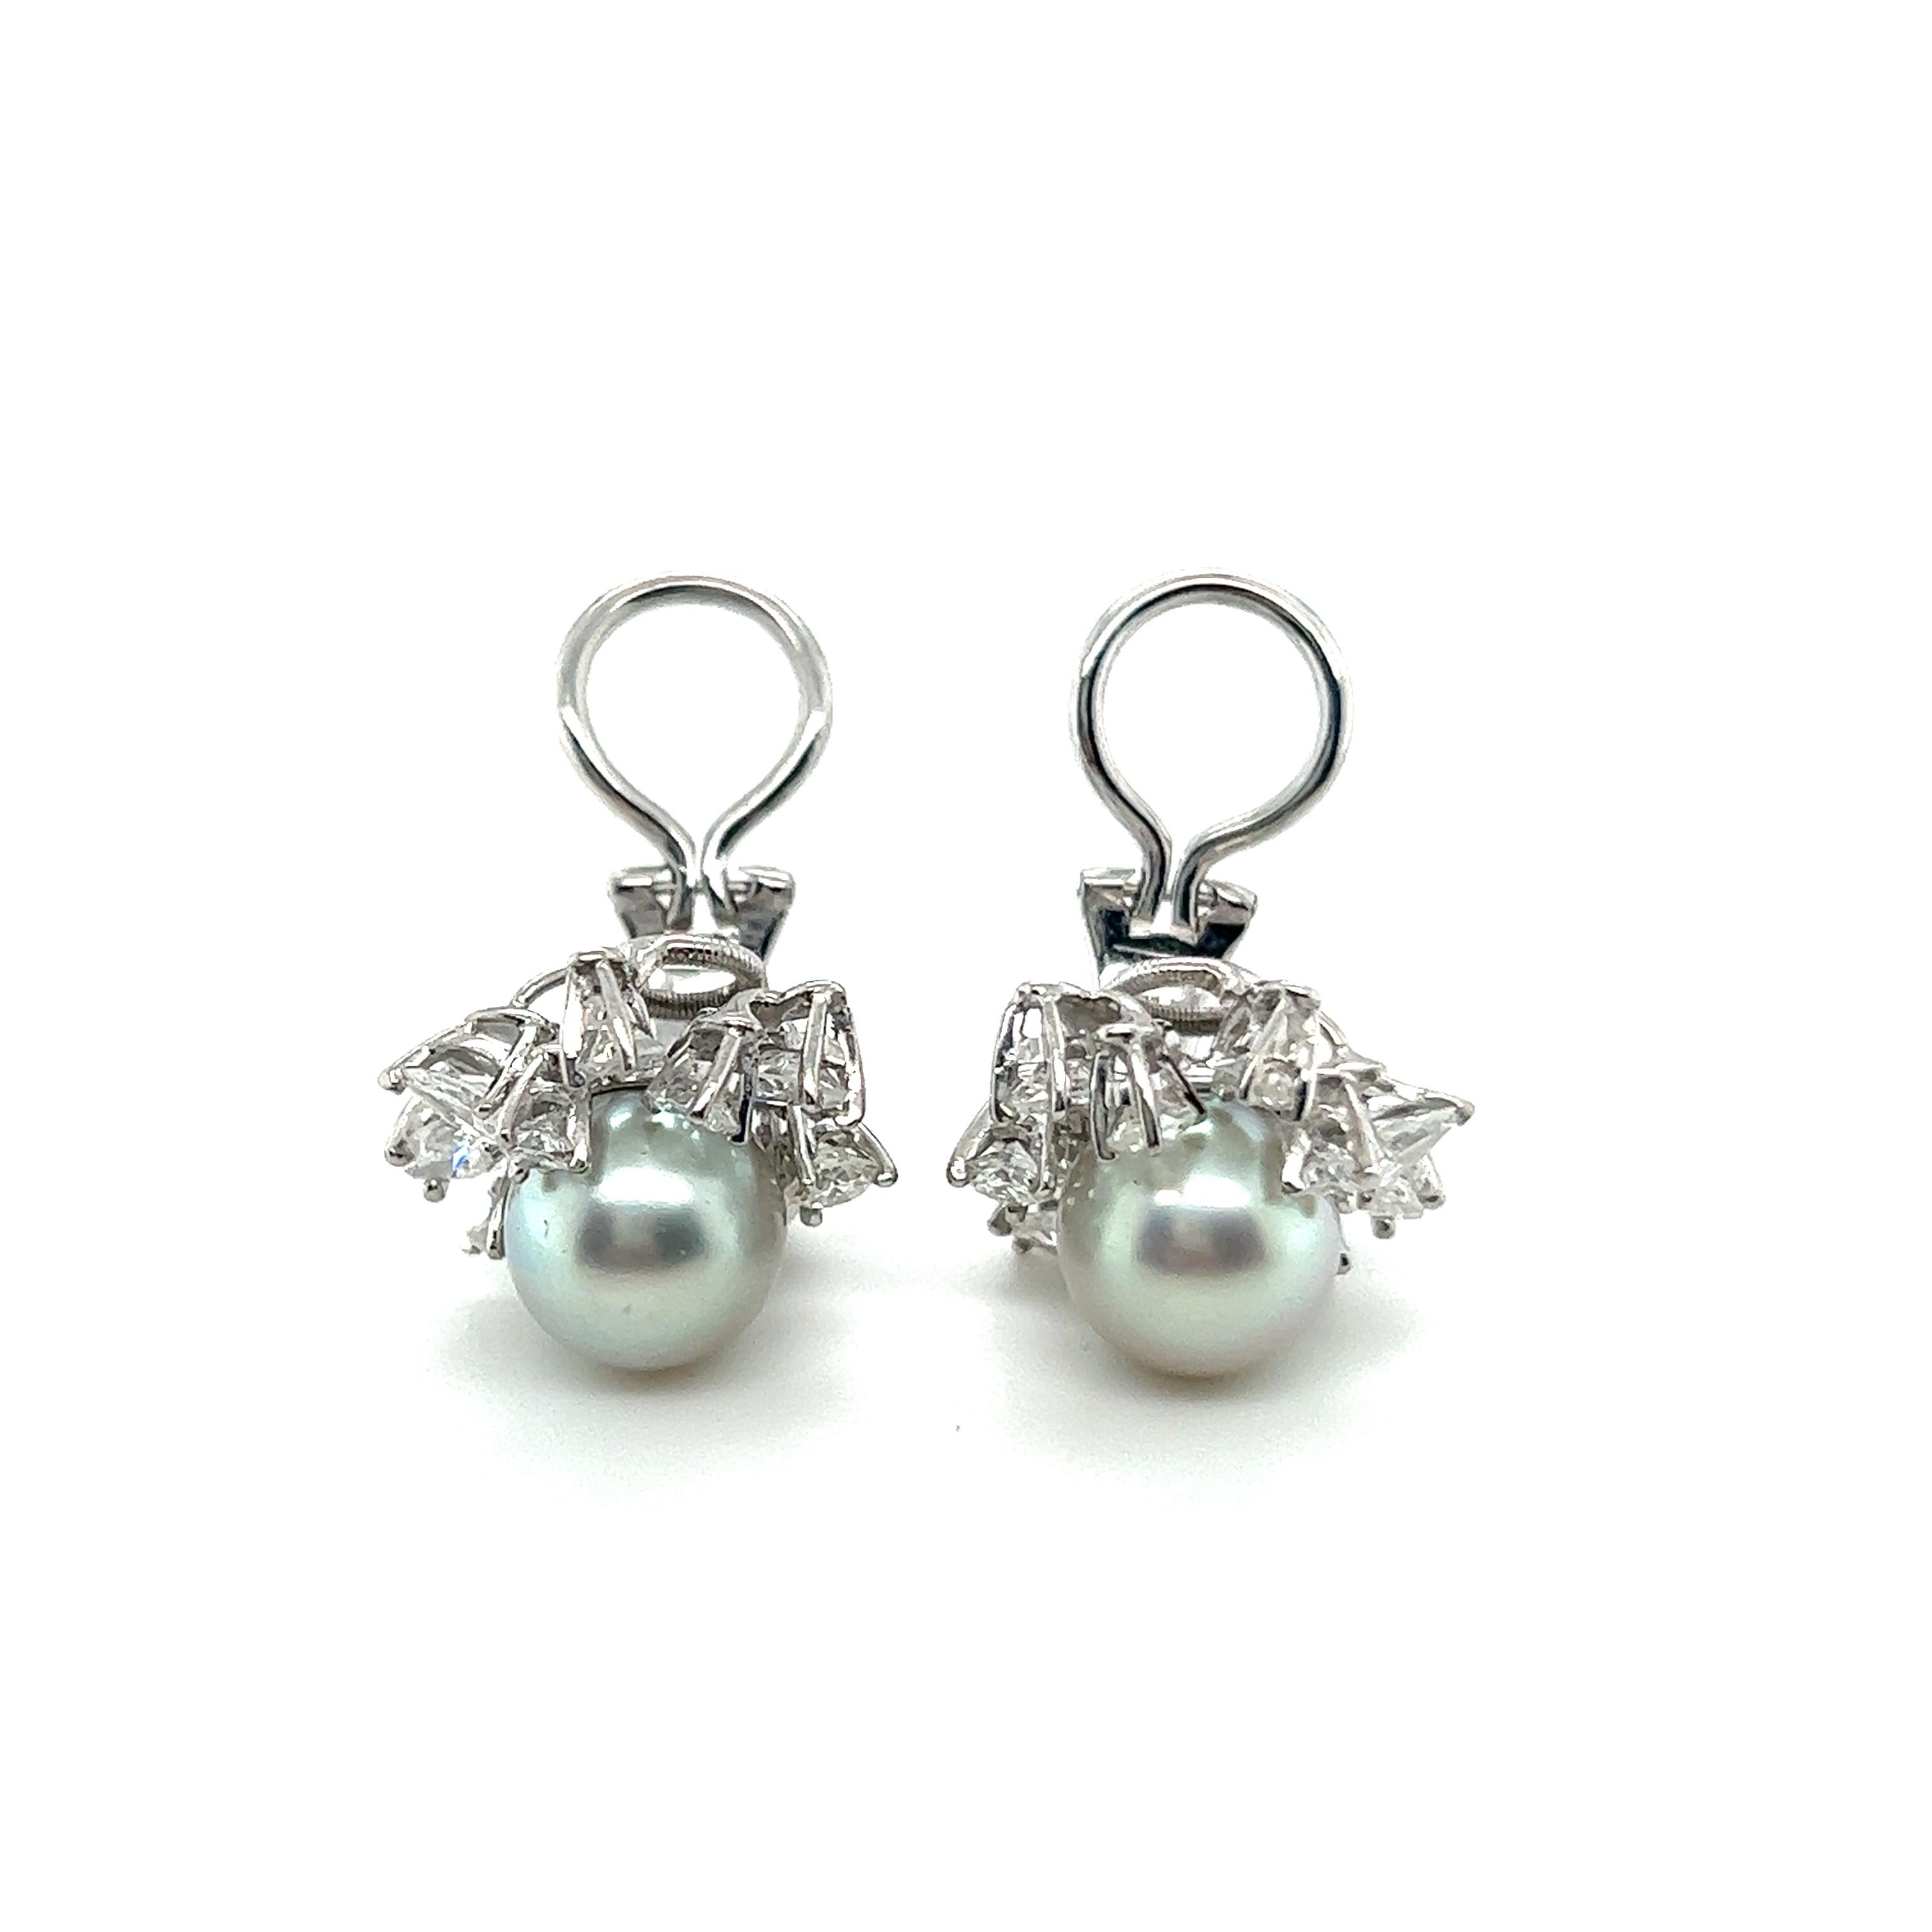 Artist Clip-on Earrings with Pearls and Diamonds in 18 Karat White Gold by Meister